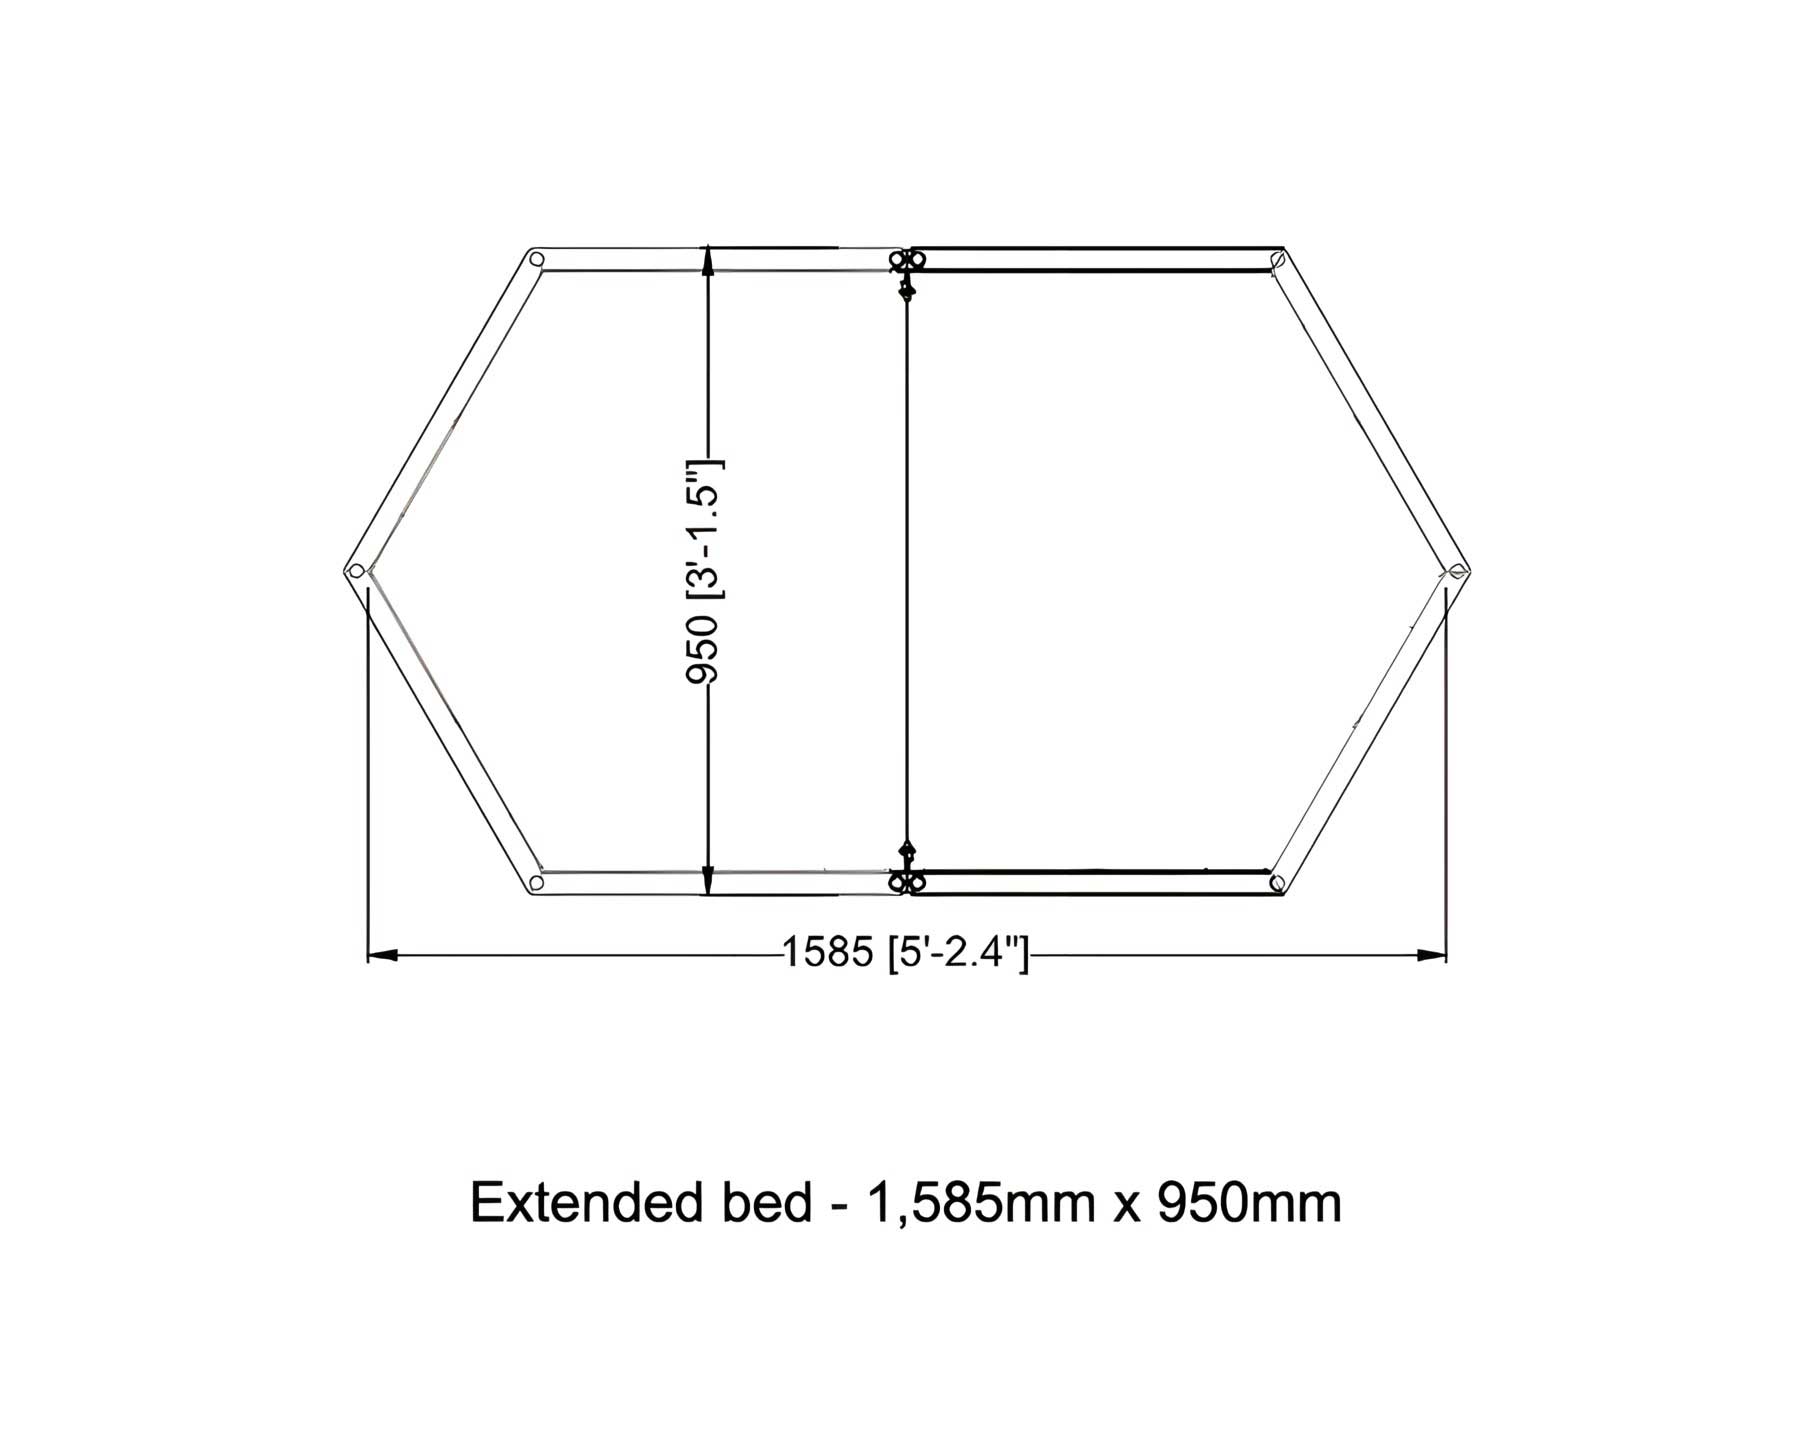 Dimensions of Ergo Raised Garden Bed with extension kit added